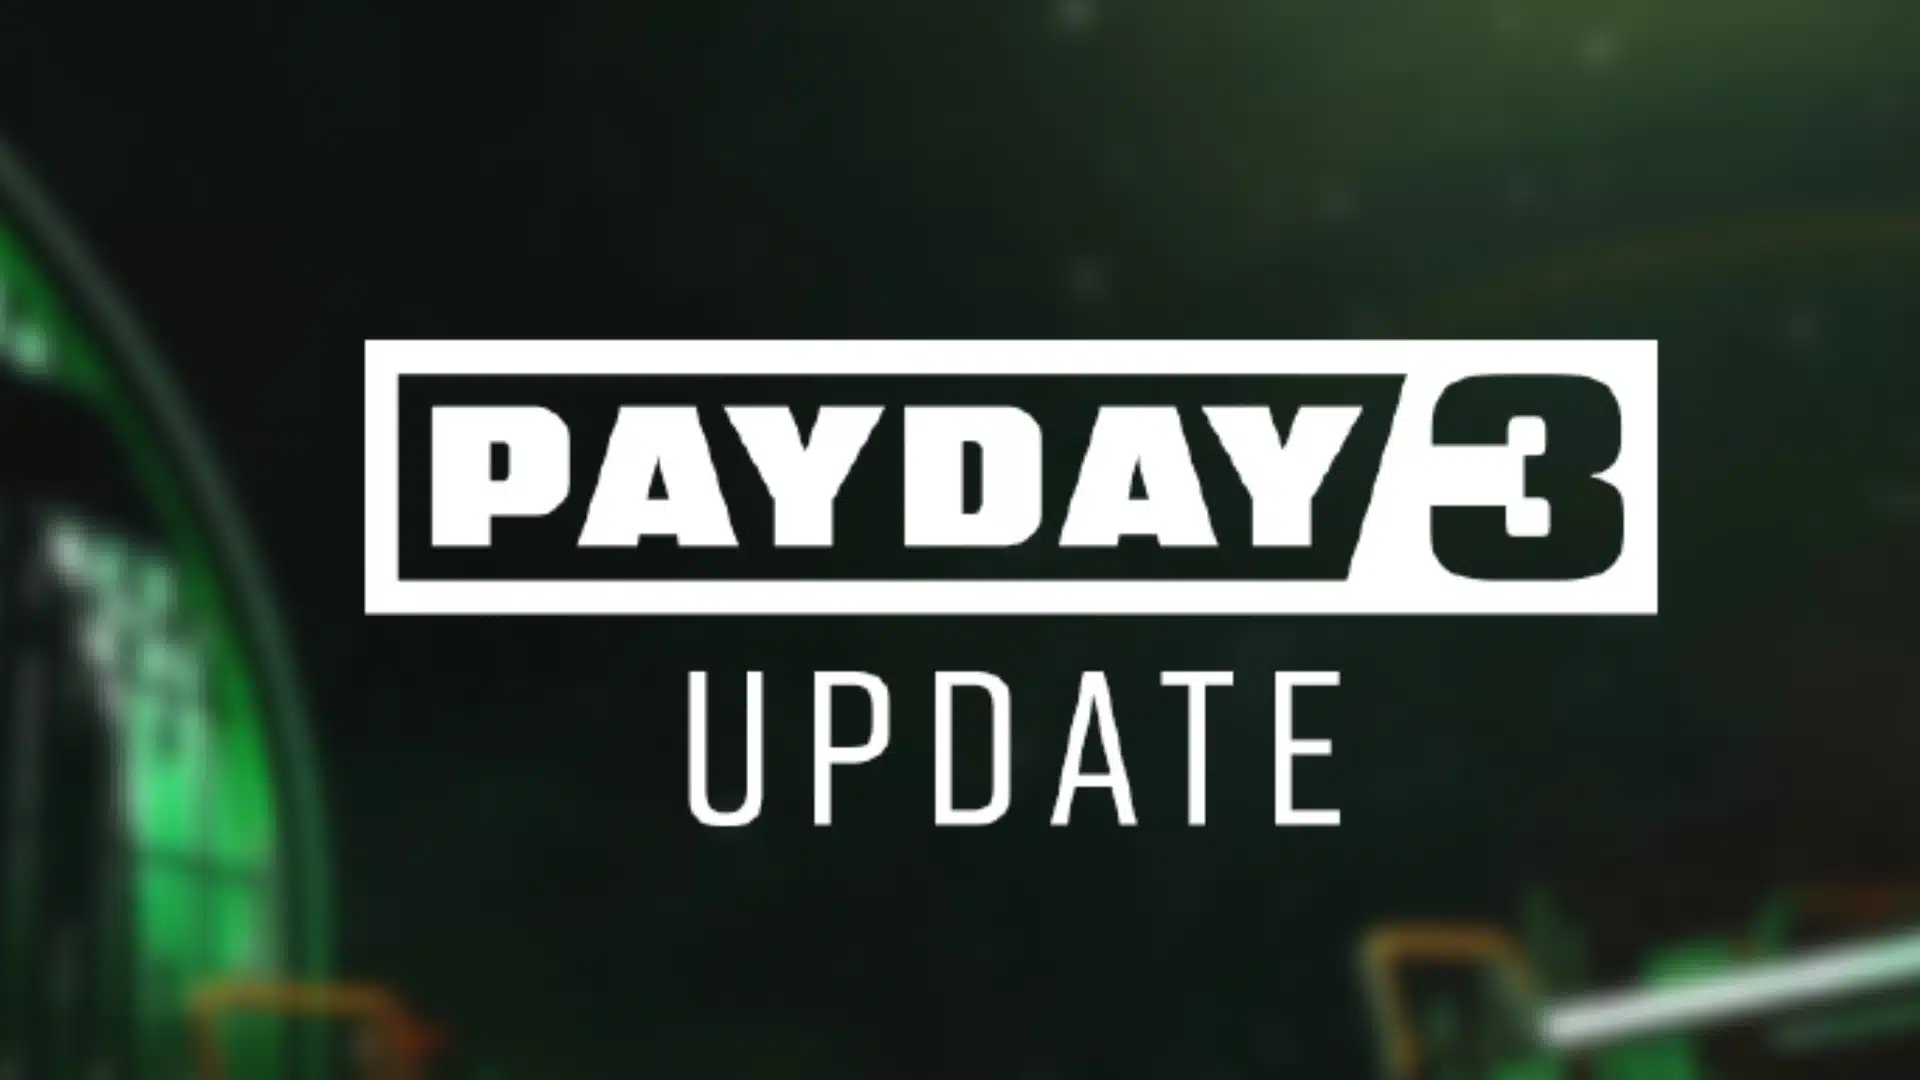 Payday 3 Update 1.000.025